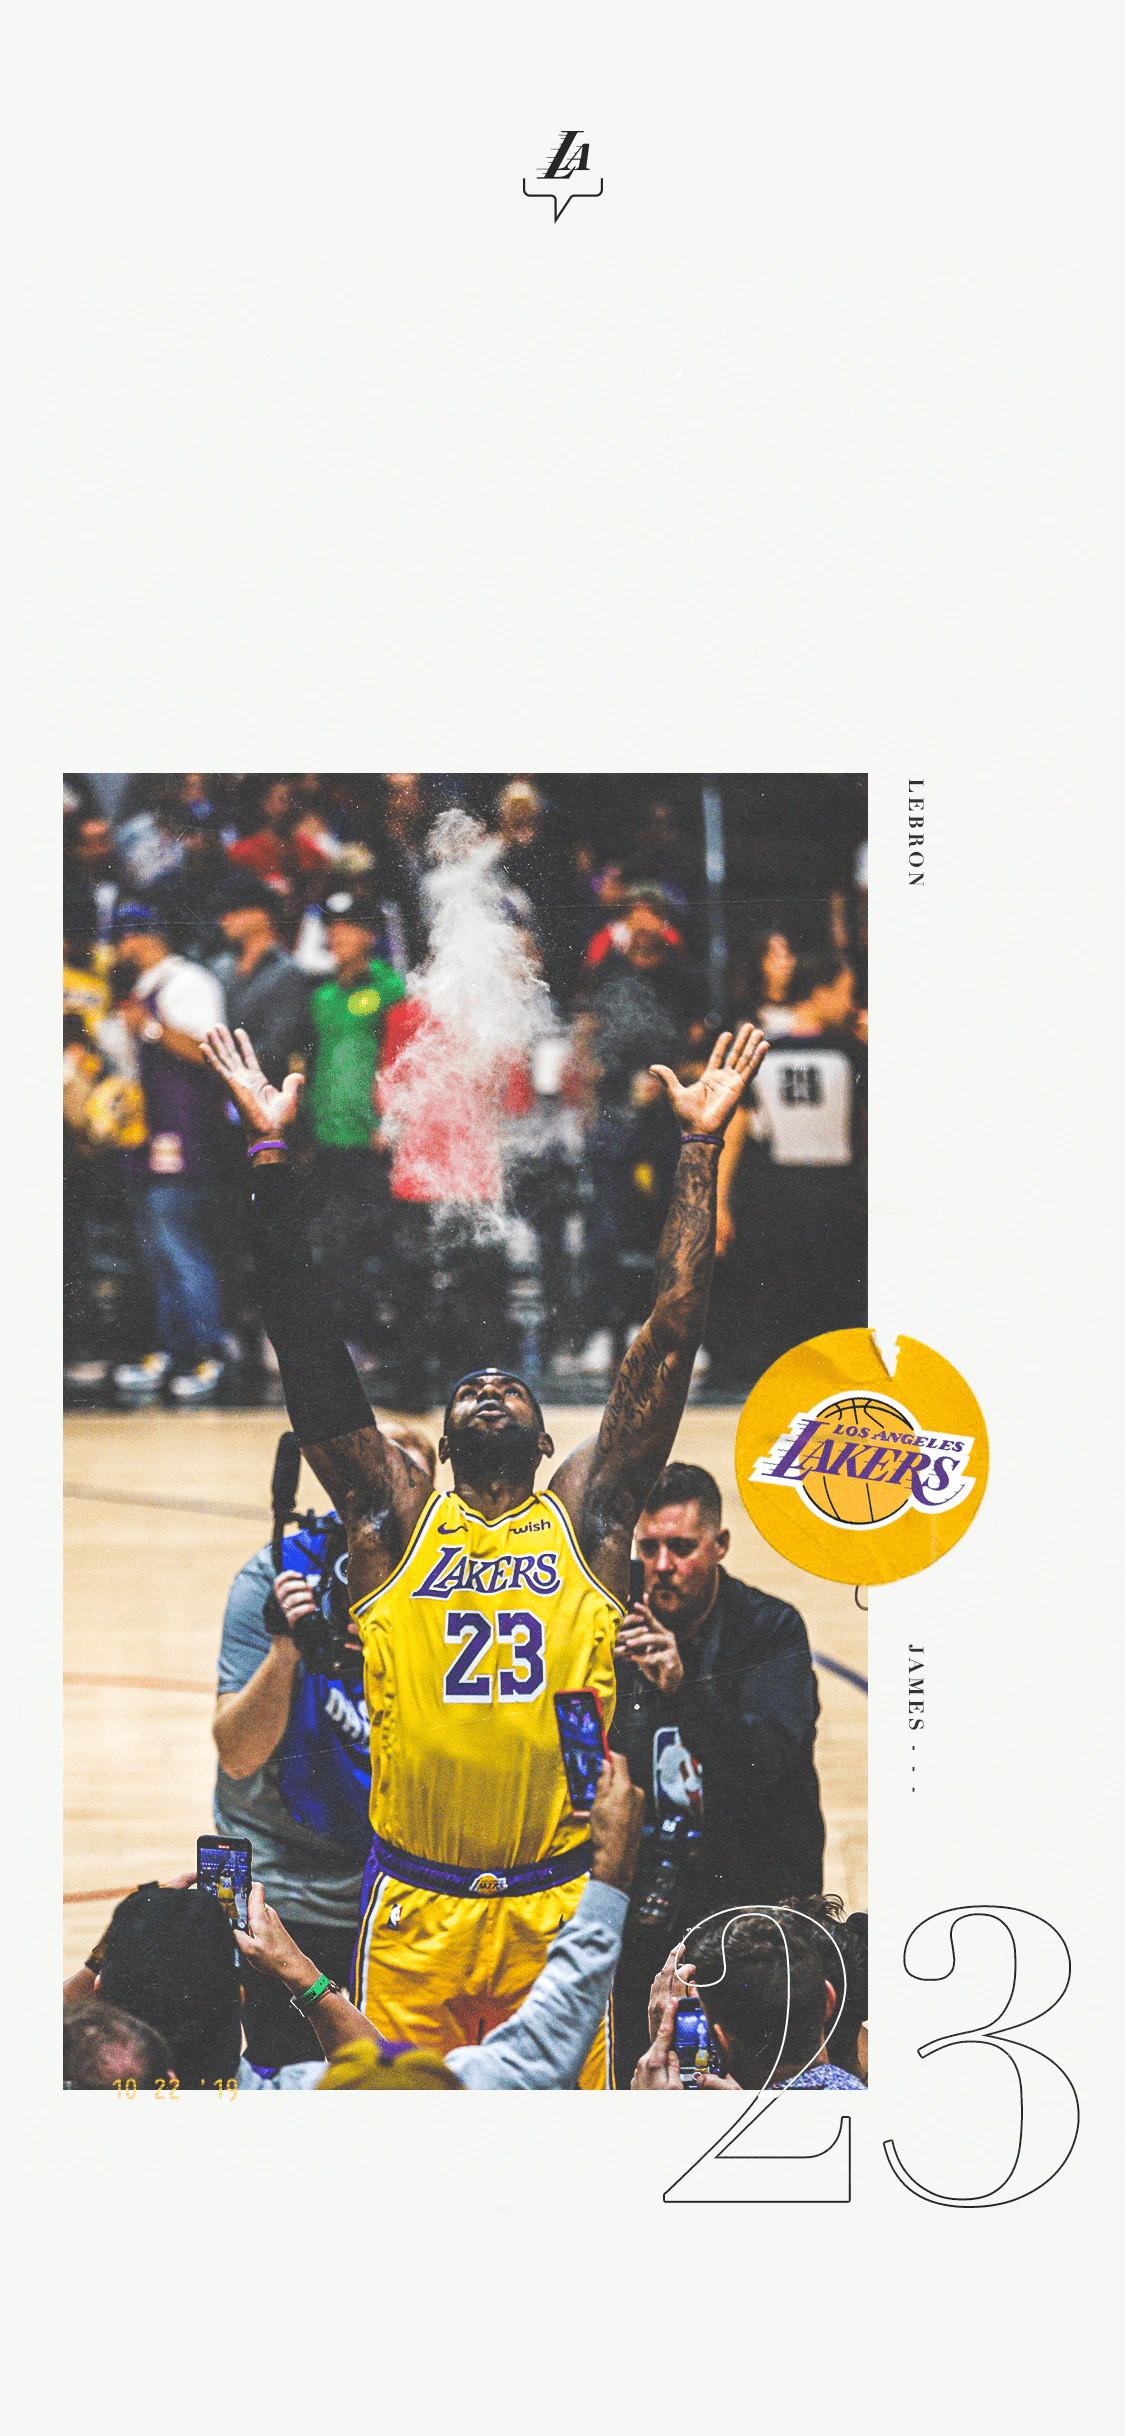 Lakers wallpaper i made for my phone. - Lebron James